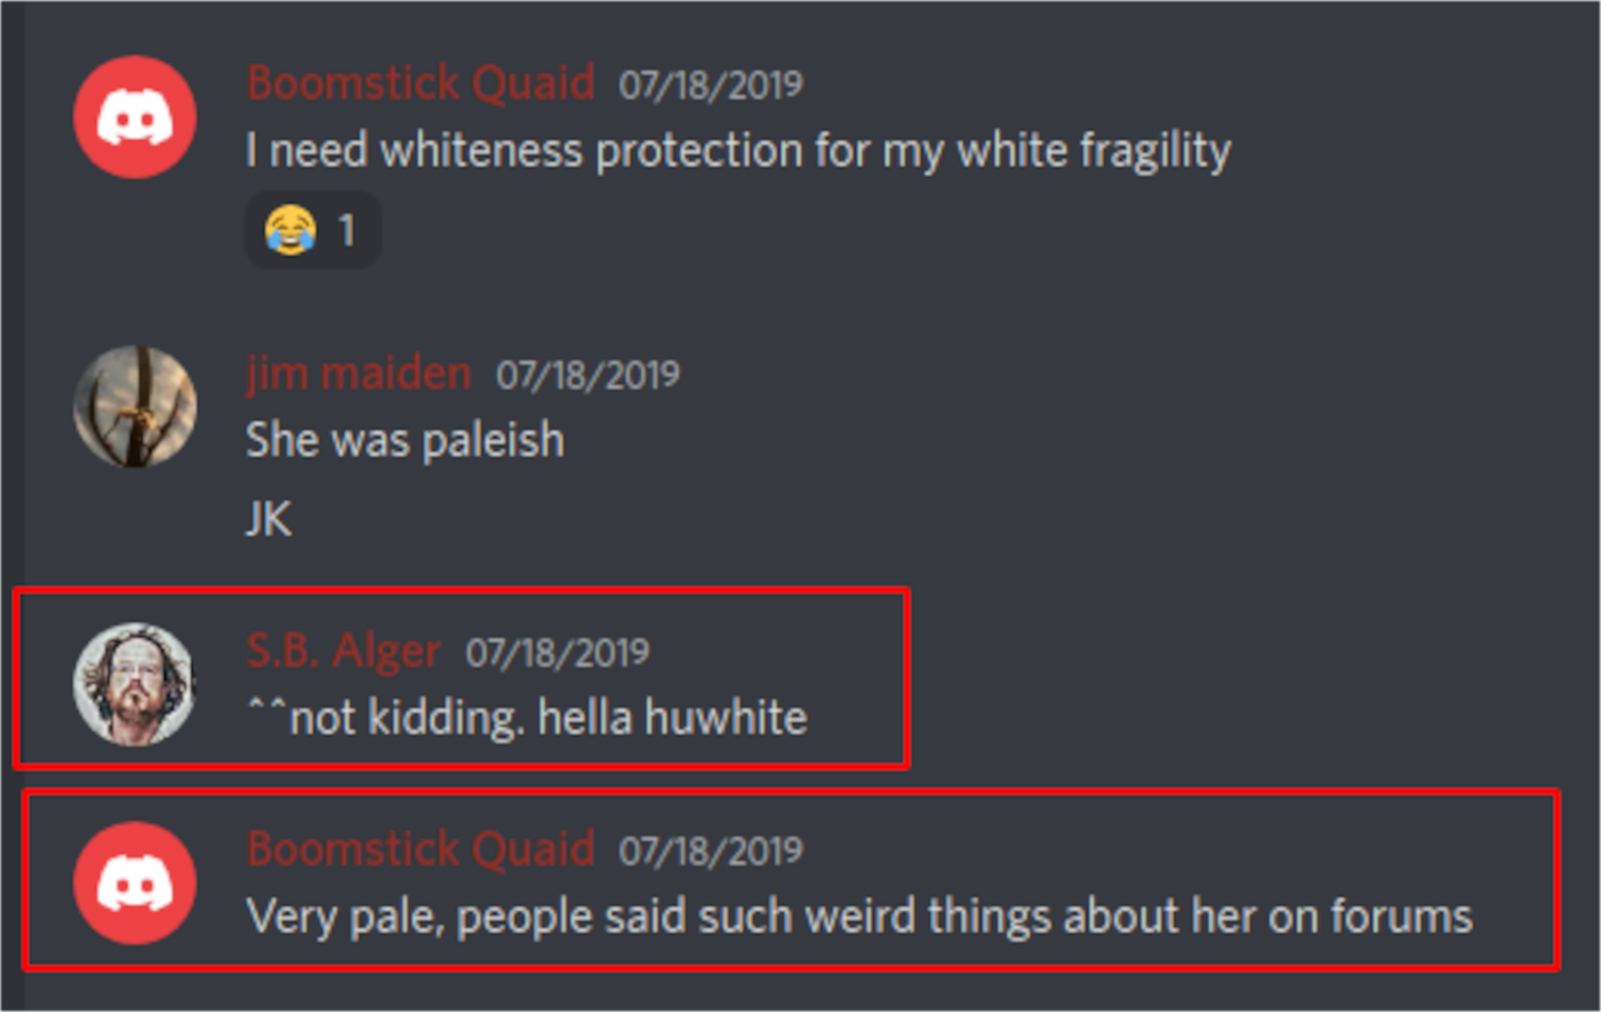 Discord Server: "I need whiteness protection for my white fragility" "She was plaeish, JK" "^^not kiddling, hella huwhite" "Very pale, people said such weird things about her on forums"